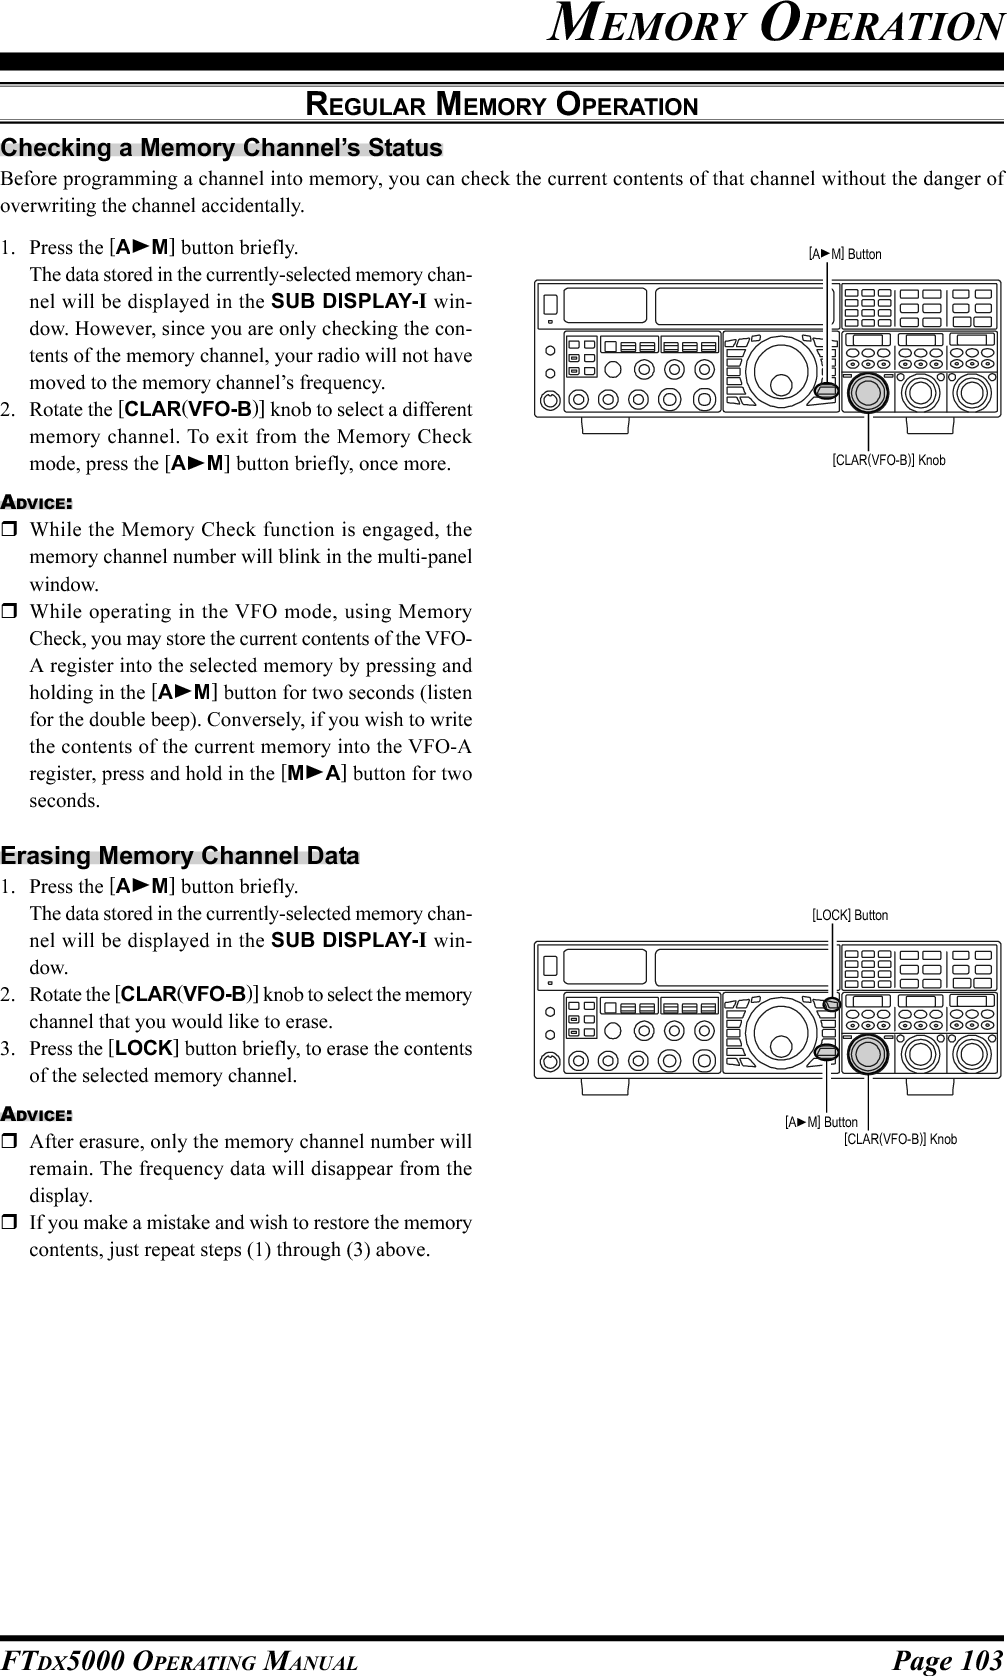 Page 103FTDX5000 OPERATING MANUALChecking a Memory Channel’s StatusBefore programming a channel into memory, you can check the current contents of that channel without the danger ofoverwriting the channel accidentally.MEMORY OPERATIONREGULAR MEMORY OPERATION1. Press the [AM] button briefly.The data stored in the currently-selected memory chan-nel will be displayed in the SUB DISPLAY-I win-dow. However, since you are only checking the con-tents of the memory channel, your radio will not havemoved to the memory channel’s frequency.2. Rotate the [CLAR(VFO-B)] knob to select a differentmemory channel. To exit from the Memory Checkmode, press the [AM] button briefly, once more.ADVICE:While the Memory Check function is engaged, thememory channel number will blink in the multi-panelwindow.While operating in the VFO mode, using MemoryCheck, you may store the current contents of the VFO-A register into the selected memory by pressing andholding in the [AM] button for two seconds (listenfor the double beep). Conversely, if you wish to writethe contents of the current memory into the VFO-Aregister, press and hold in the [MA] button for twoseconds.Erasing Memory Channel Data1. Press the [AM] button briefly.The data stored in the currently-selected memory chan-nel will be displayed in the SUB DISPLAY-I win-dow.2. Rotate the [CLAR(VFO-B)] knob to select the memorychannel that you would like to erase.3. Press the [LOCK] button briefly, to erase the contentsof the selected memory channel.ADVICE:After erasure, only the memory channel number willremain. The frequency data will disappear from thedisplay.If you make a mistake and wish to restore the memorycontents, just repeat steps (1) through (3) above.[CLAR(VFO-B)] Knob[AM] Button[CLAR(VFO-B)] Knob[AM] Button[LOCK] Button